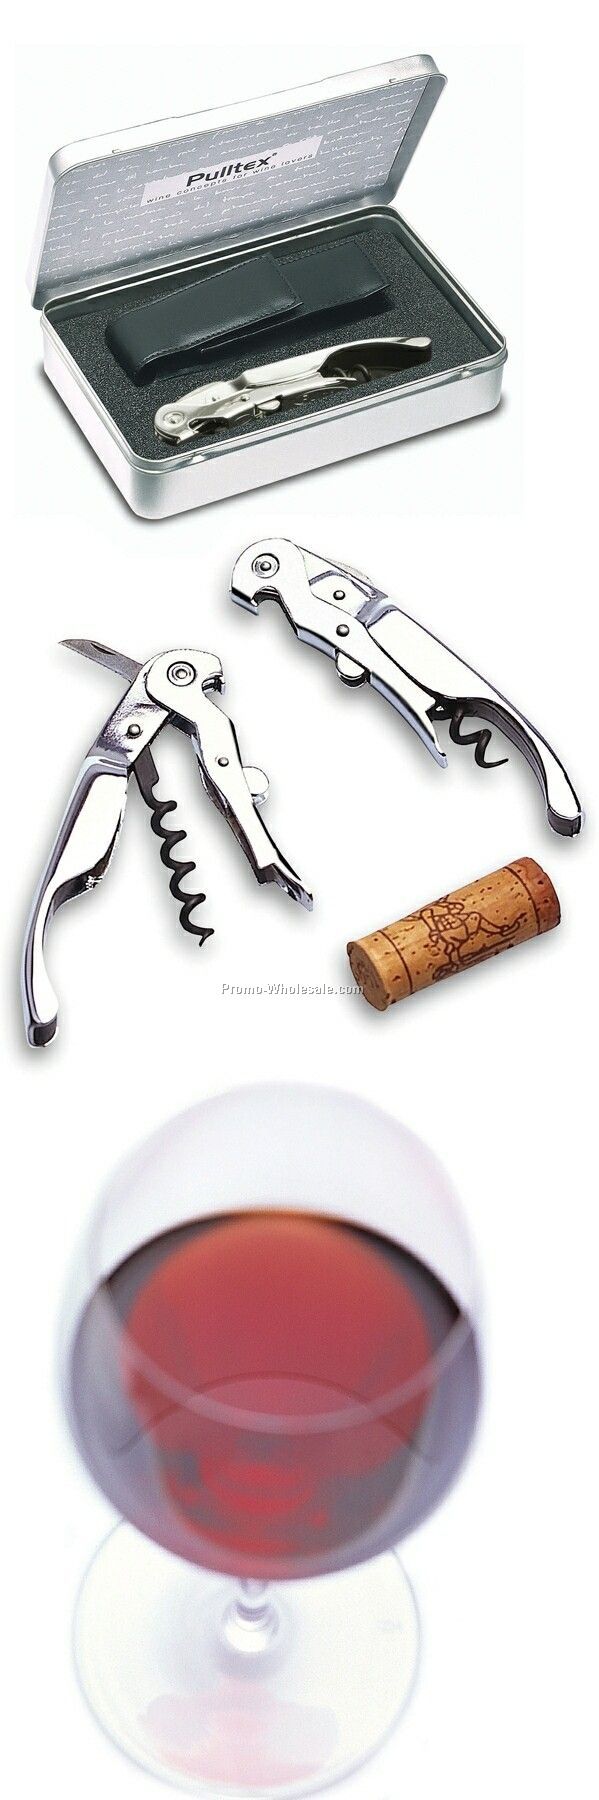 Pulltex Pullparrot Corkscrew With Leather Case